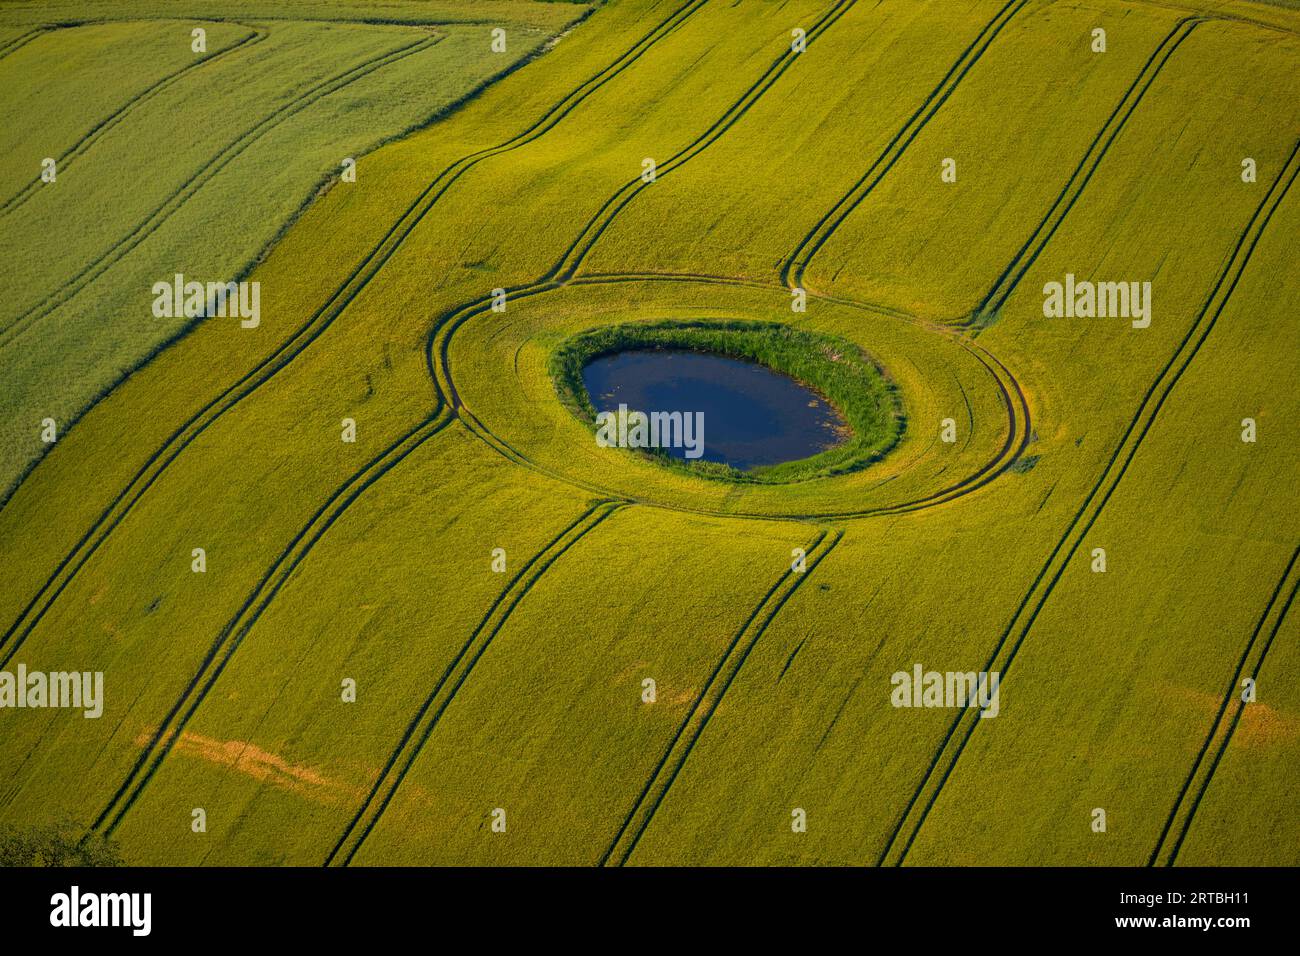 kettle hole in field landscape, aerial view, Germany, Mecklenburg-Western Pomerania Stock Photo